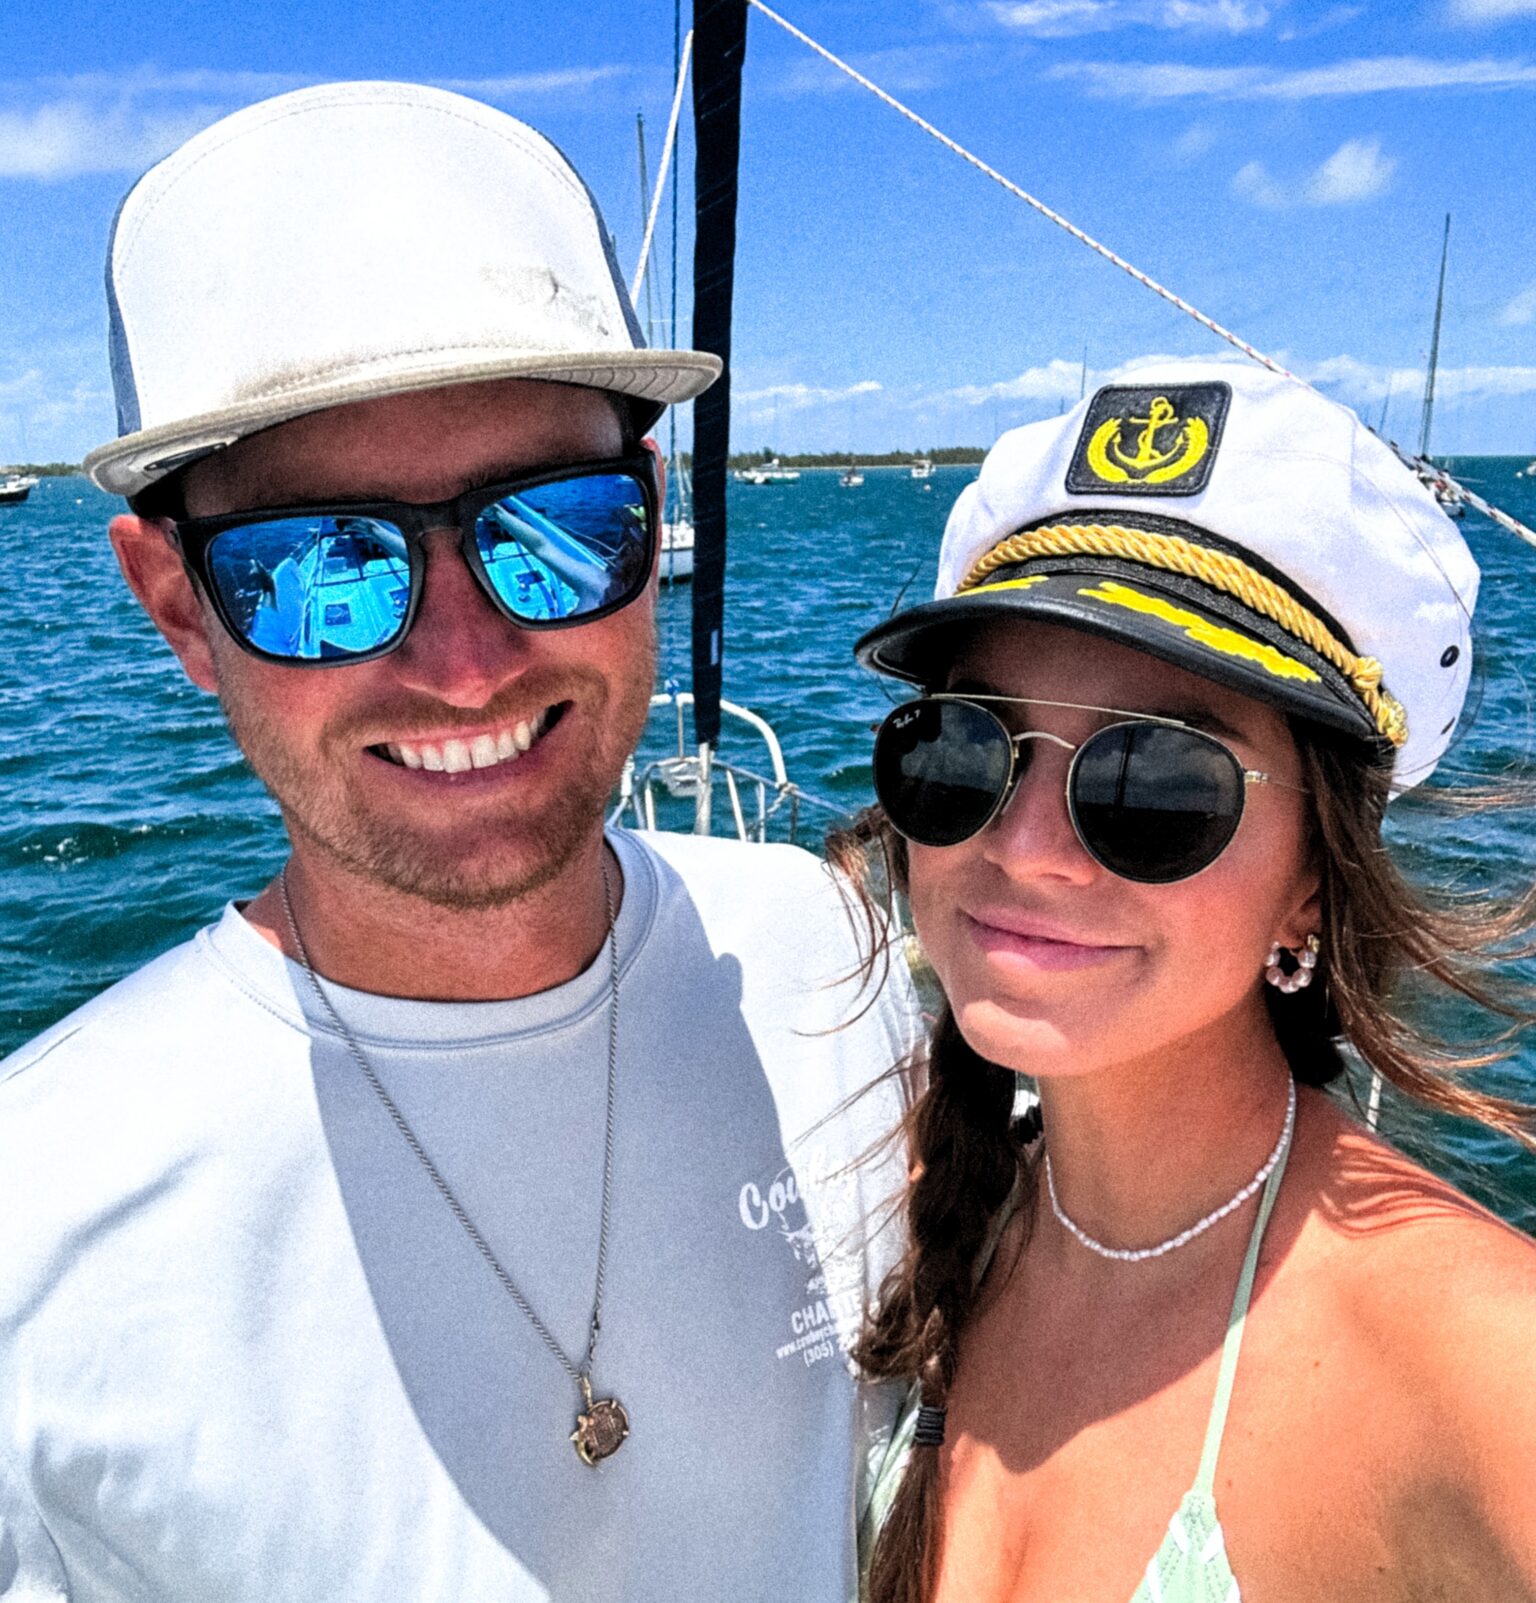 Emma and Andrew share their experience of living on a sailboat, highlighting both the challenges and savings compared to traditional housing. While adjustments like limited showers and power are necessary, they find fulfillment in the unique lifestyle and plan to continue sailing for the foreseeable future.